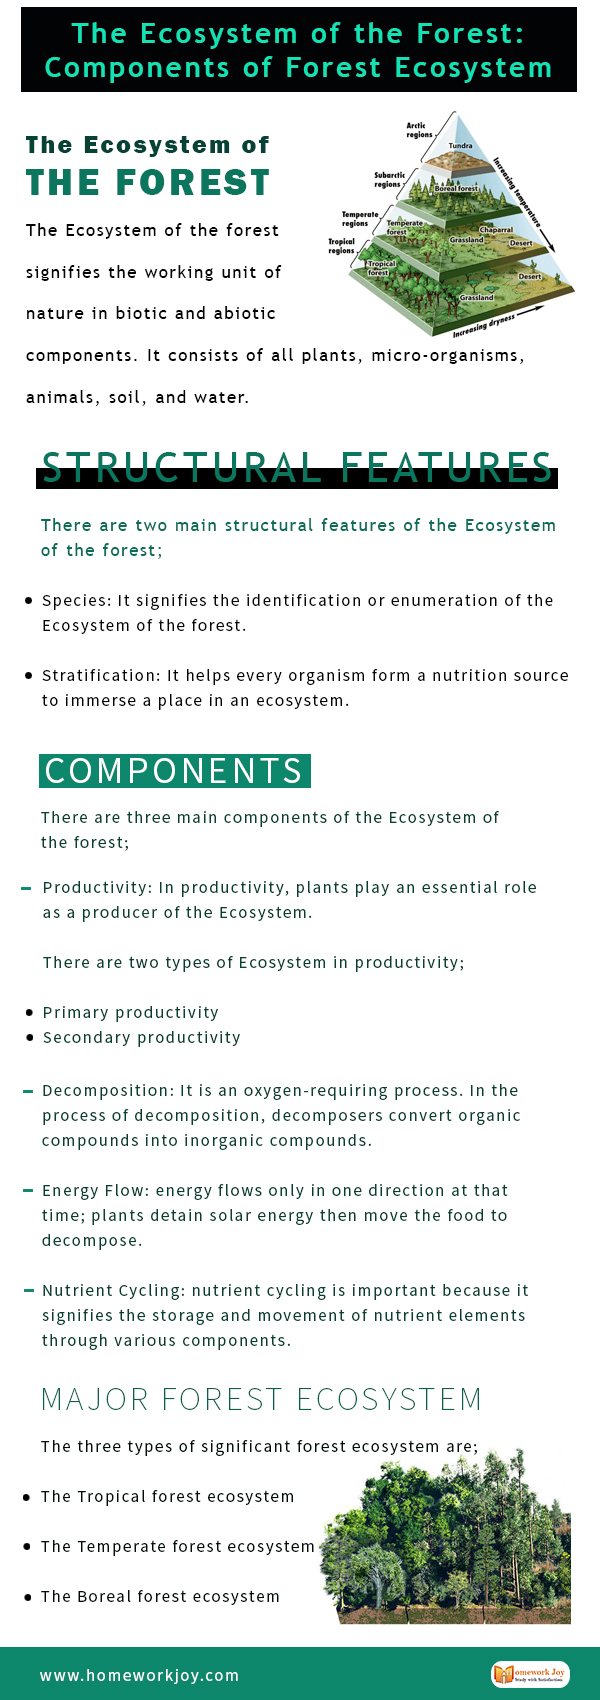 The-Ecosystem-of-the-Forest-Components-of-Forest-Ecosystem (4)